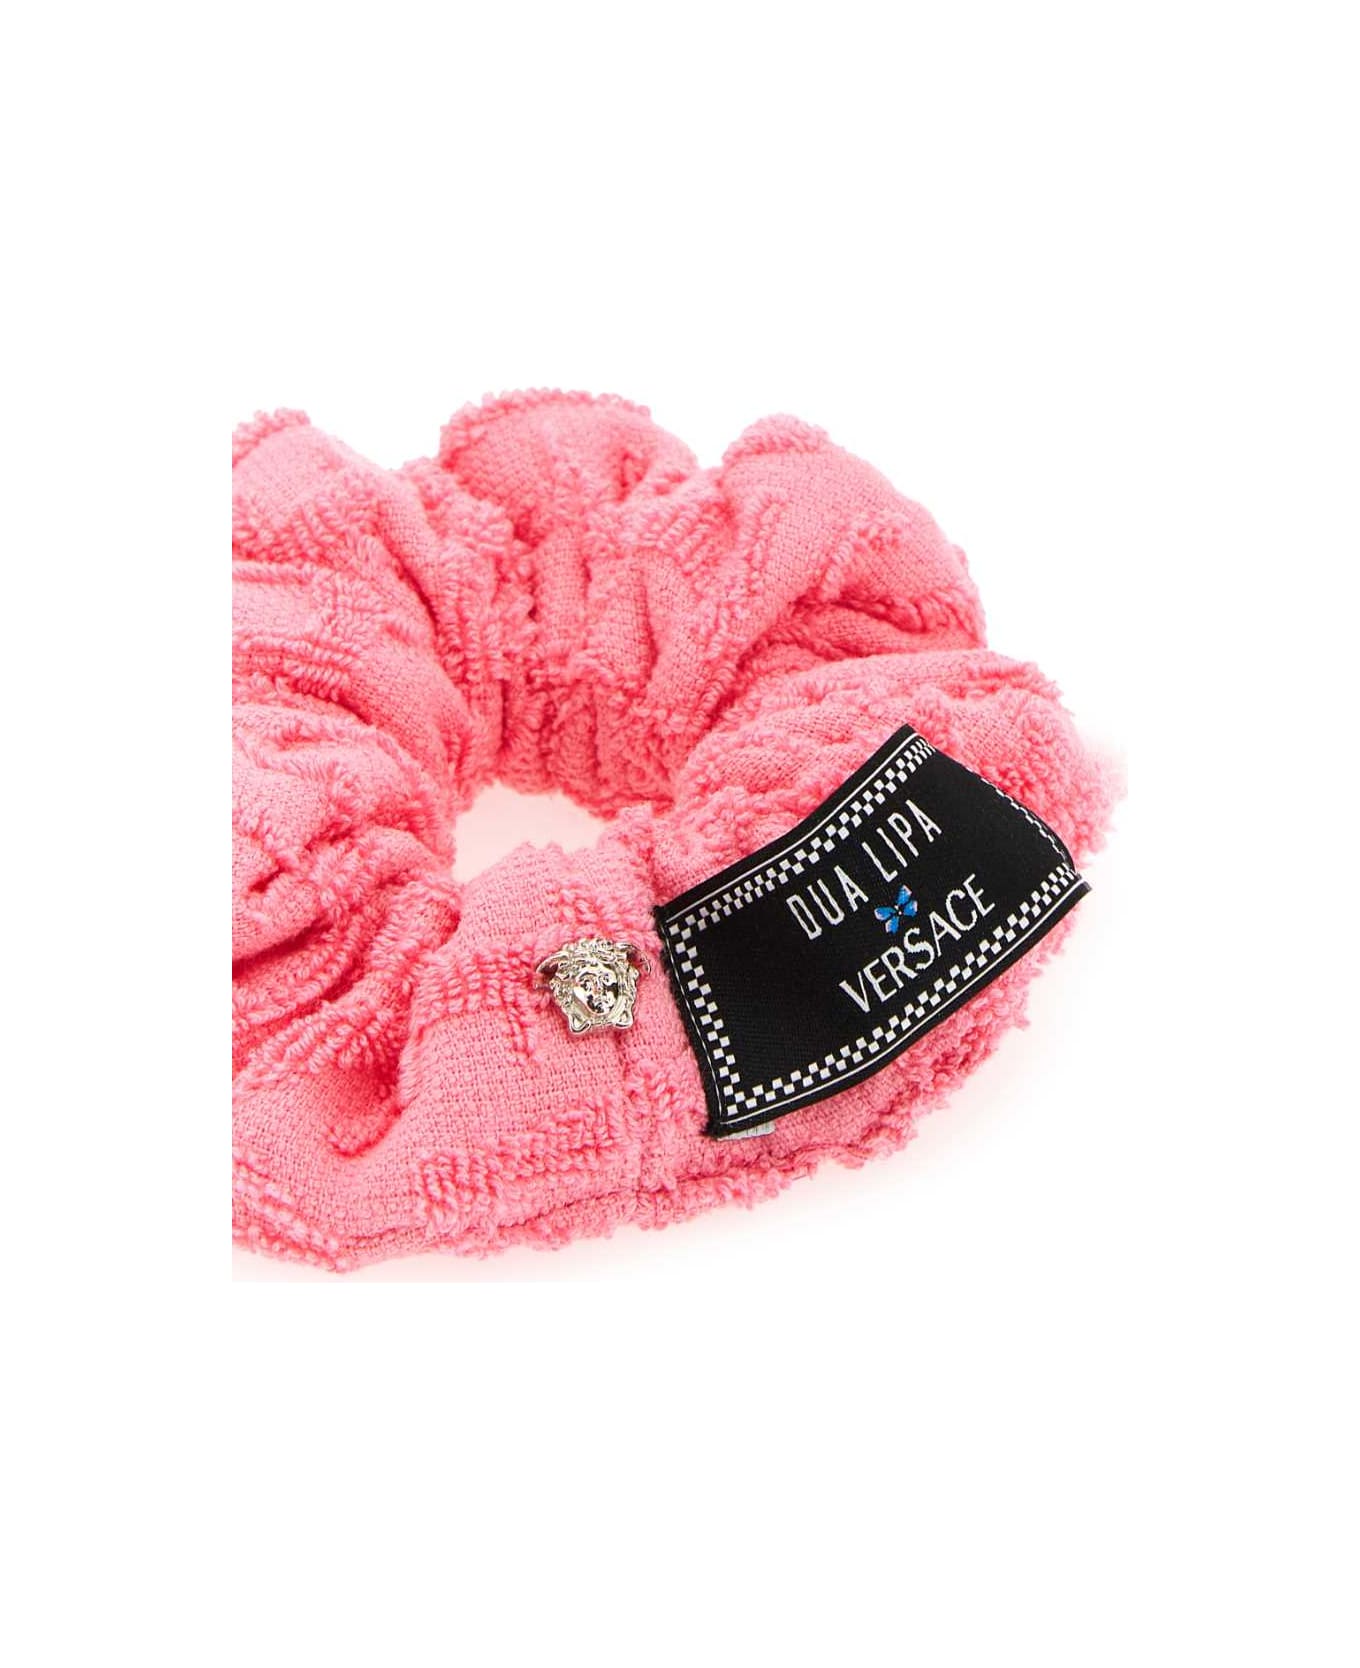 Versace Pink Terry Fabric Scrunchie - 1PO20